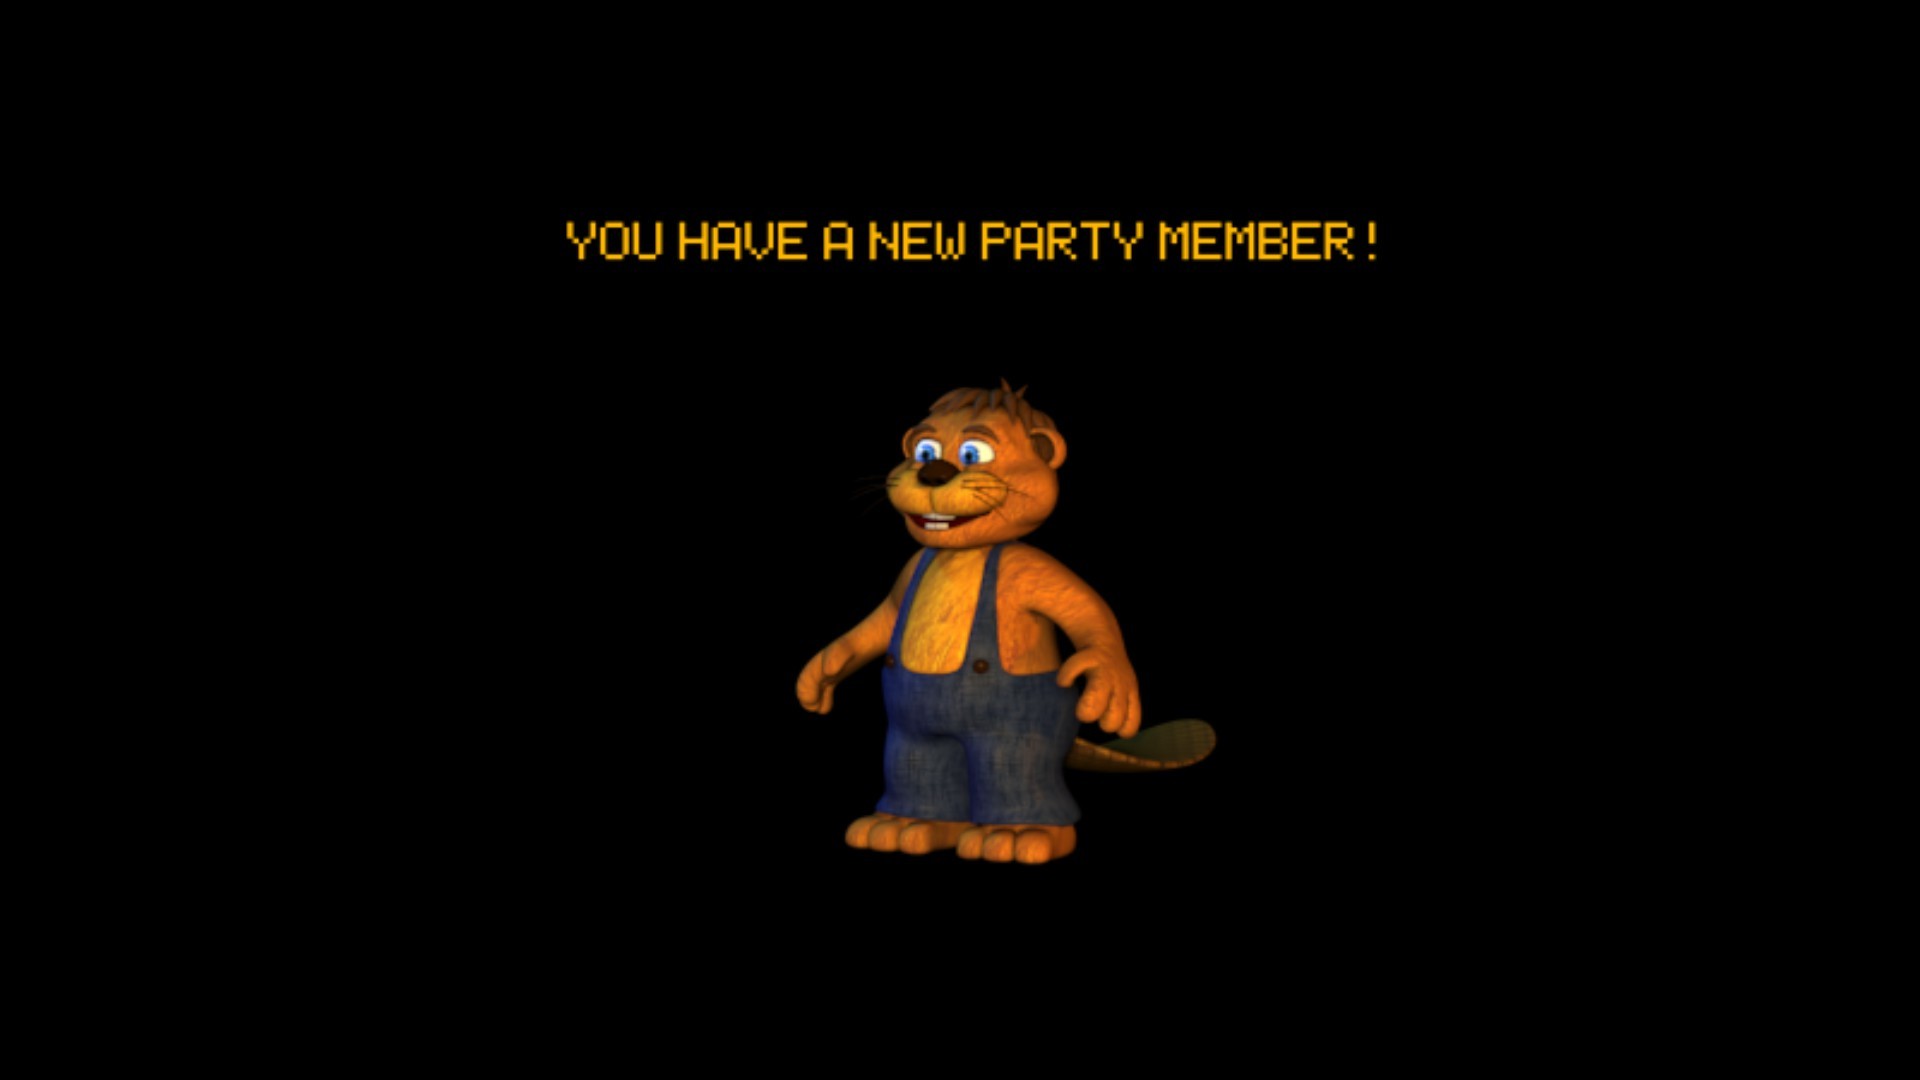 1920x1080 Category:Other Game Characters | FNaF World Wikia | FANDOM powered by Wikia